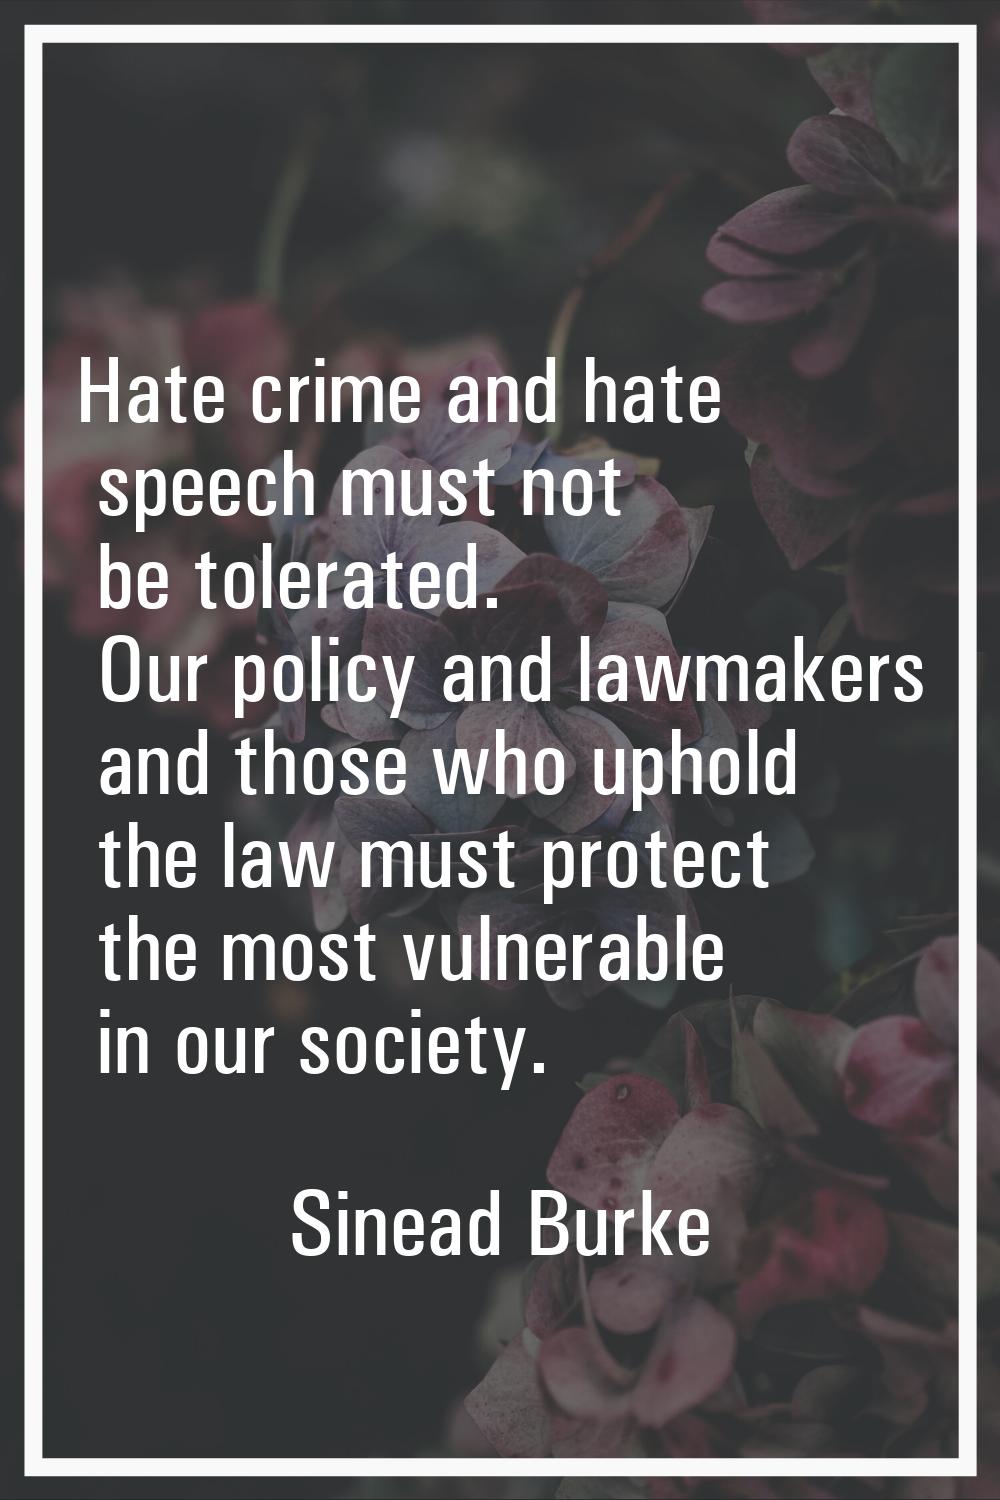 Hate crime and hate speech must not be tolerated. Our policy and lawmakers and those who uphold the